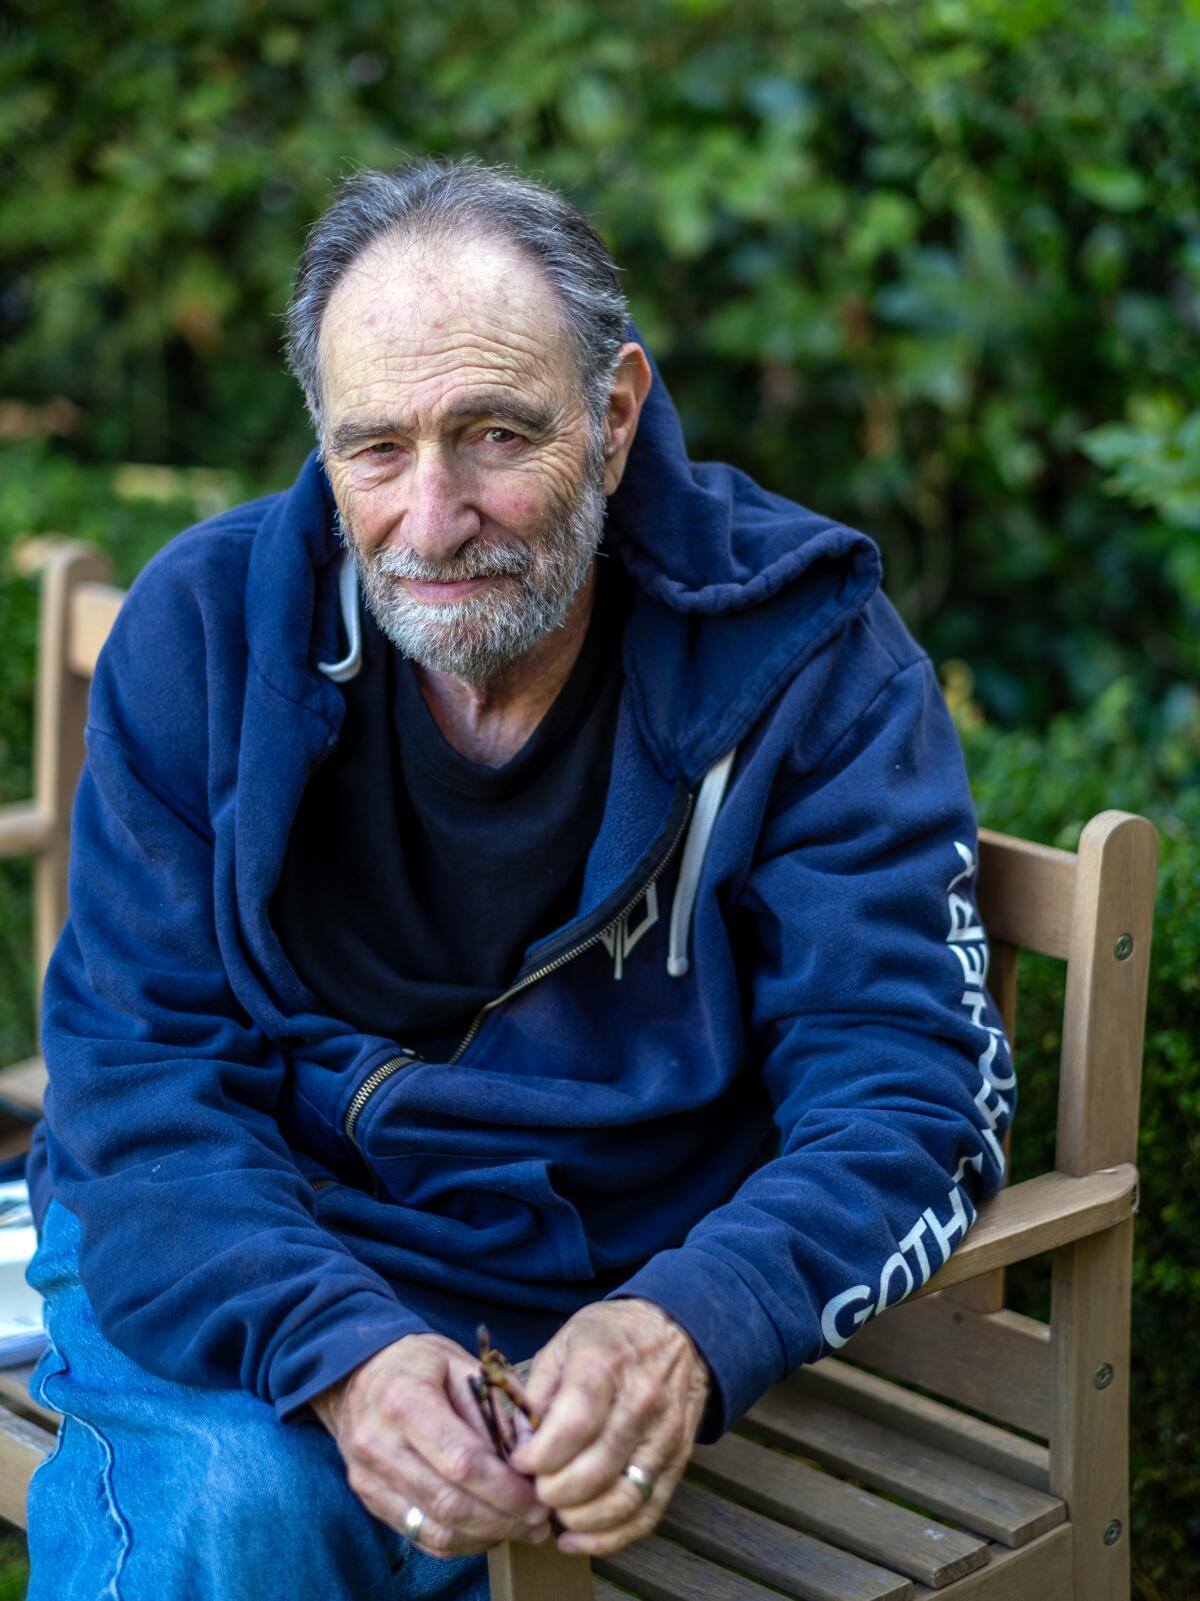 An older man in a hoodie leans forward with his hands together.